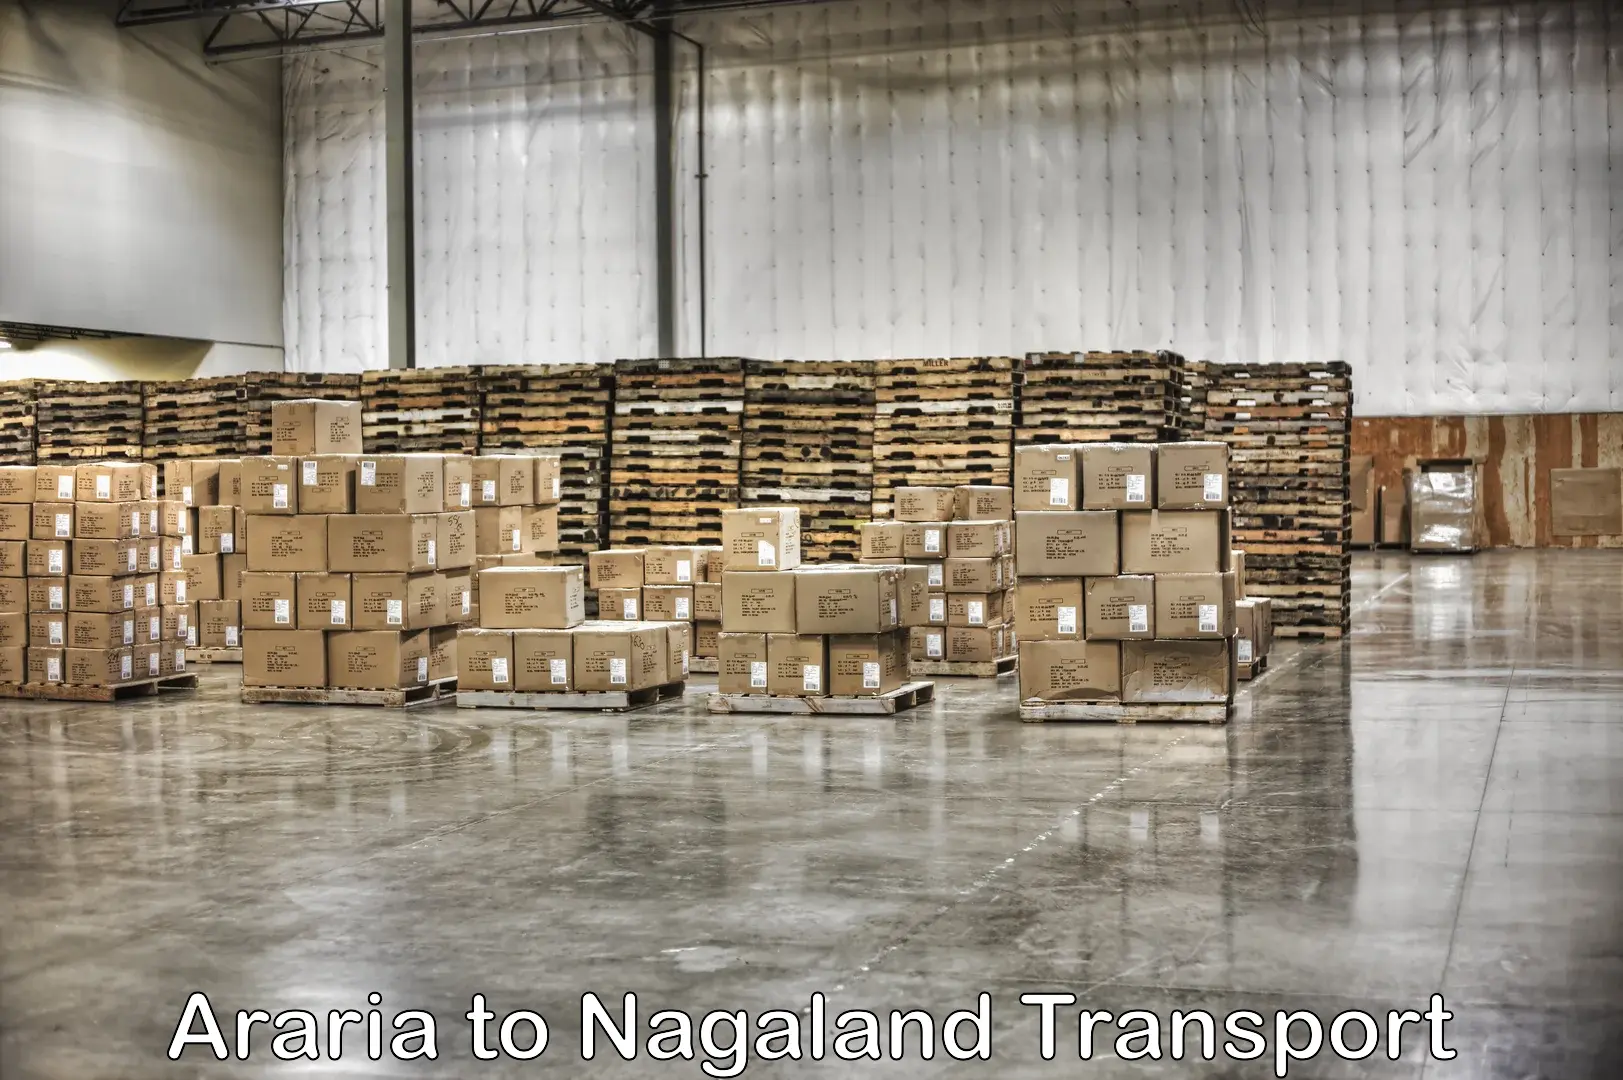 Nearby transport service Araria to Nagaland